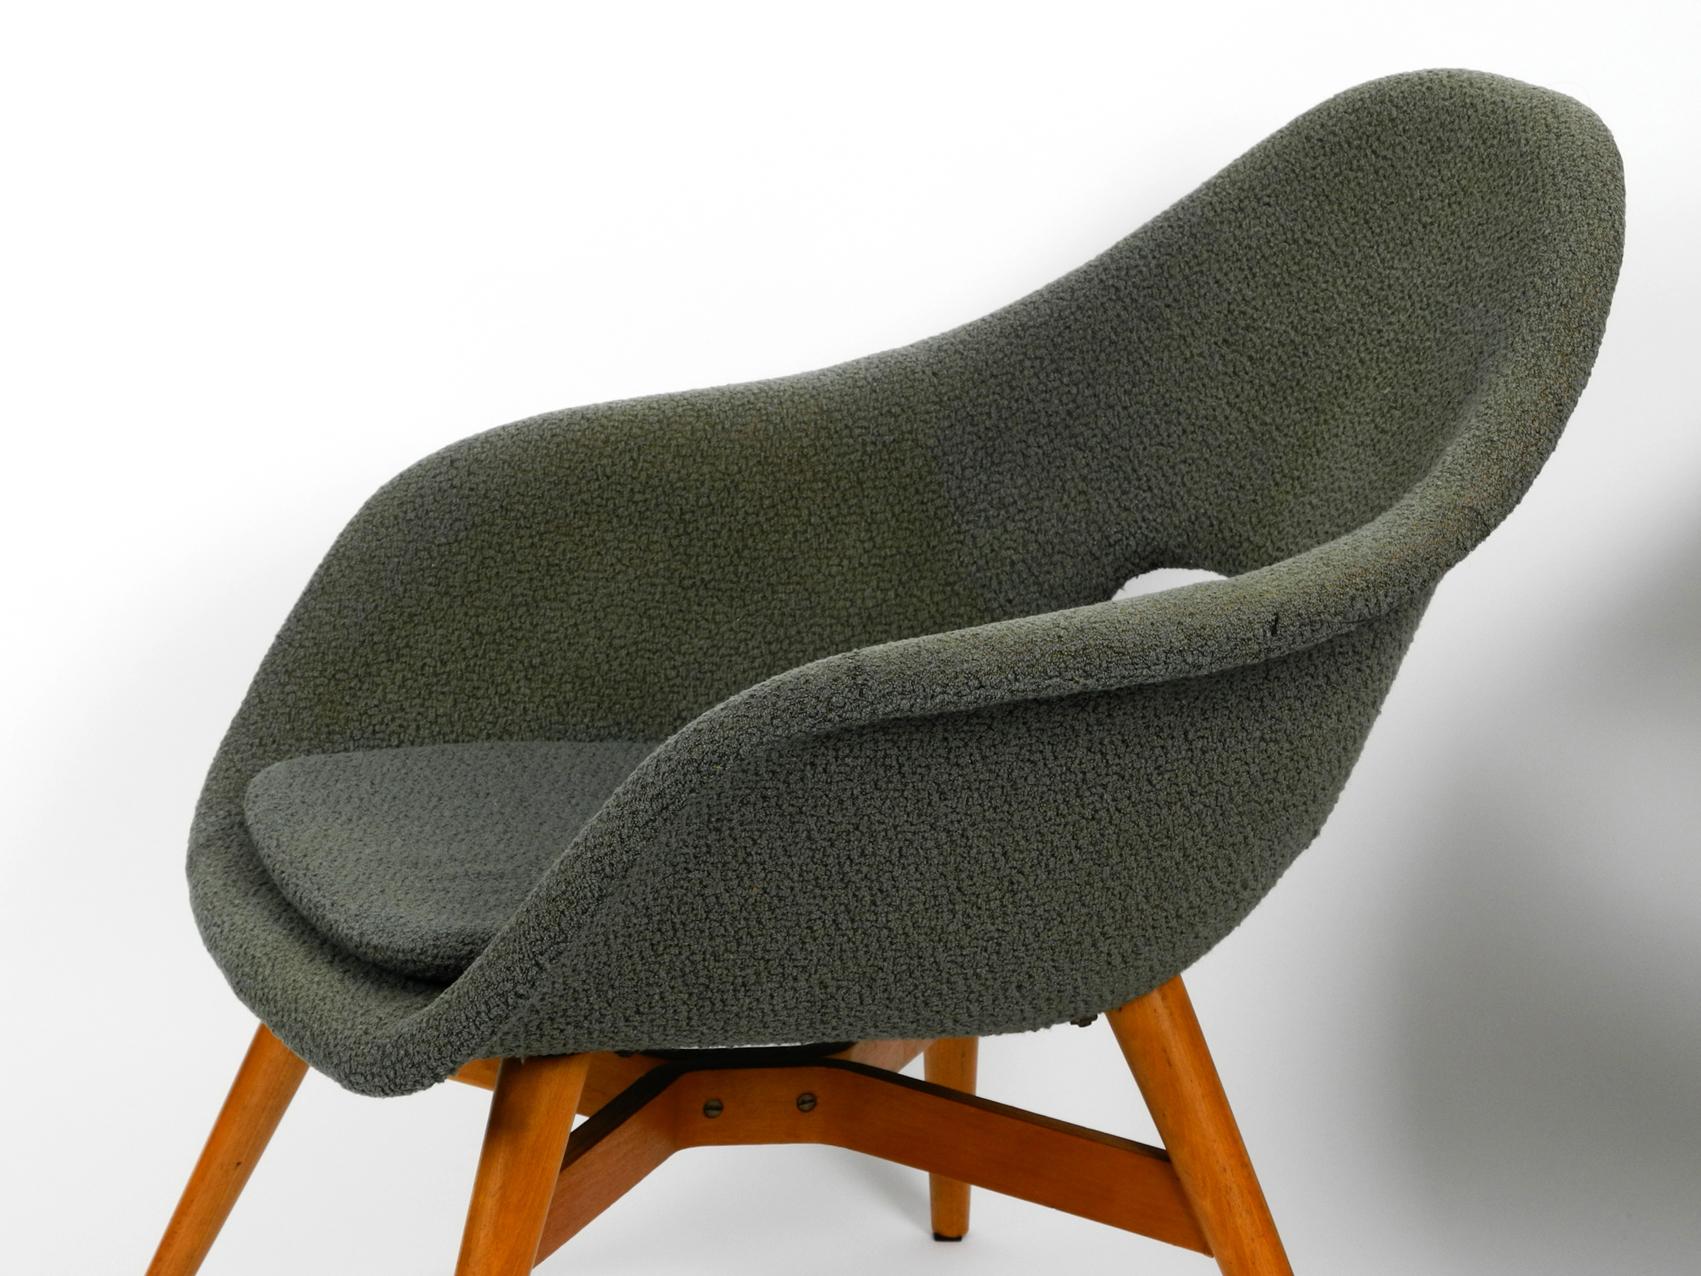 Two Lounge Chairs Miroslav Navratil with Fiberglass Shell and Original Cover 1